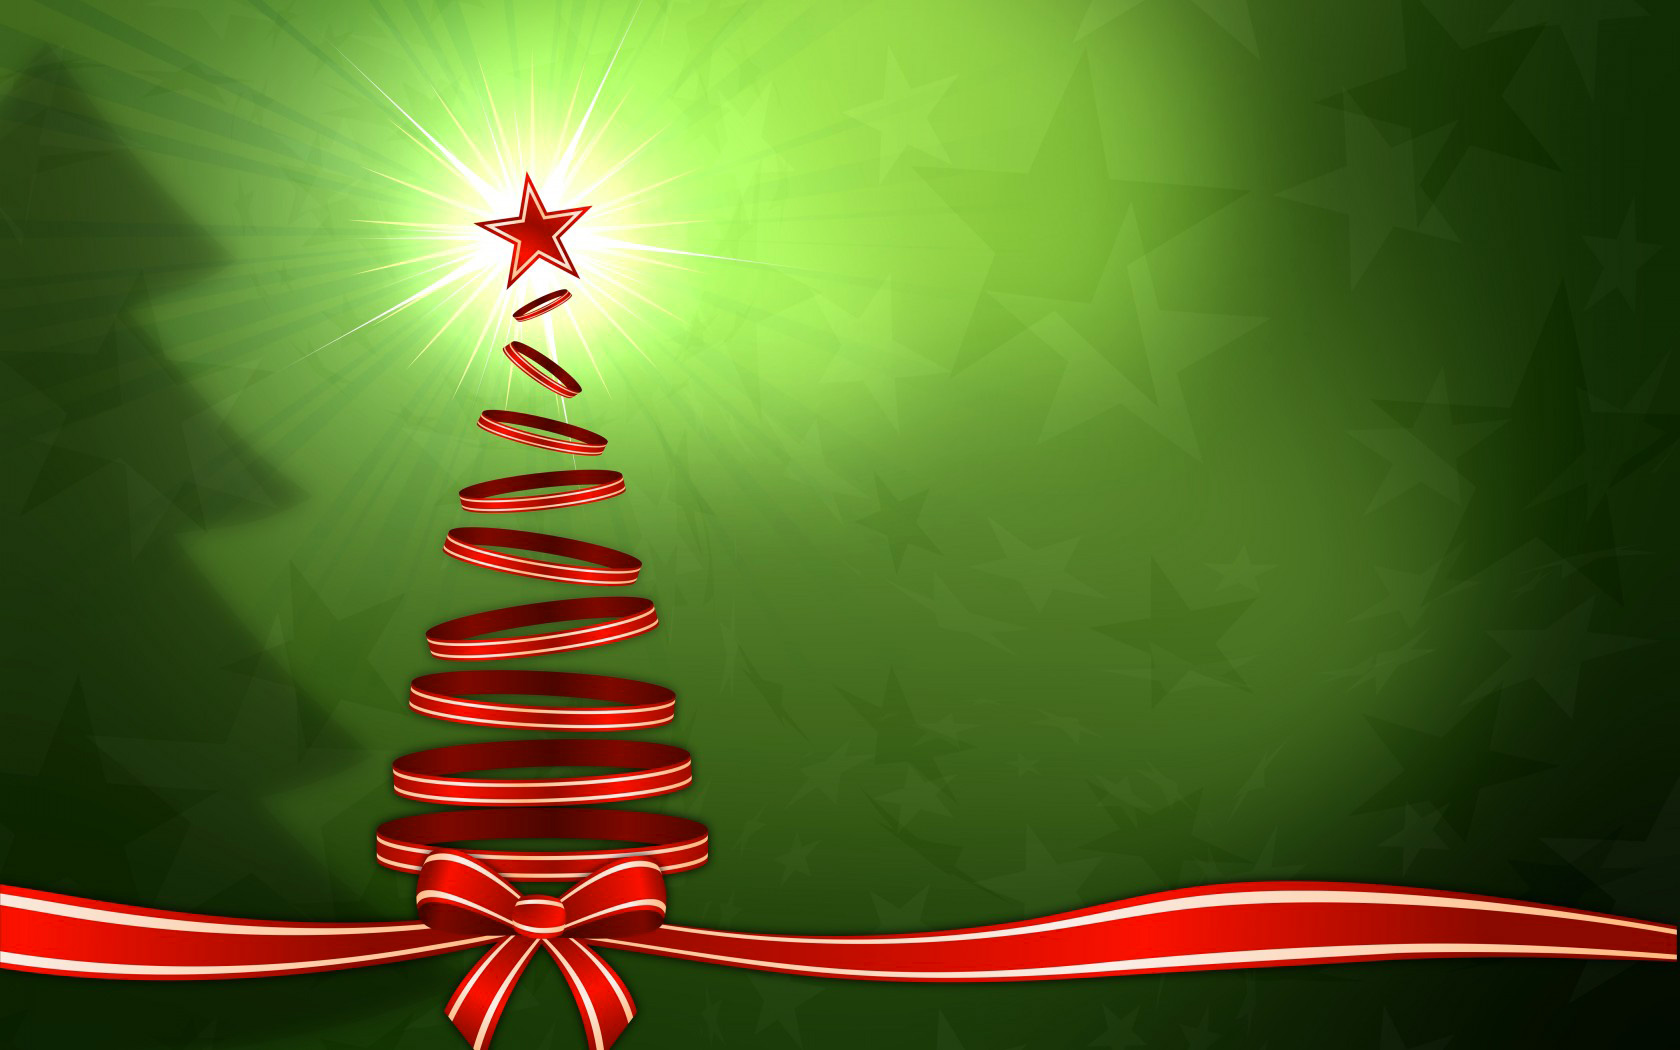 15010 Green Christmas Wallpaper Photos and Premium High Res Pictures   Getty Images